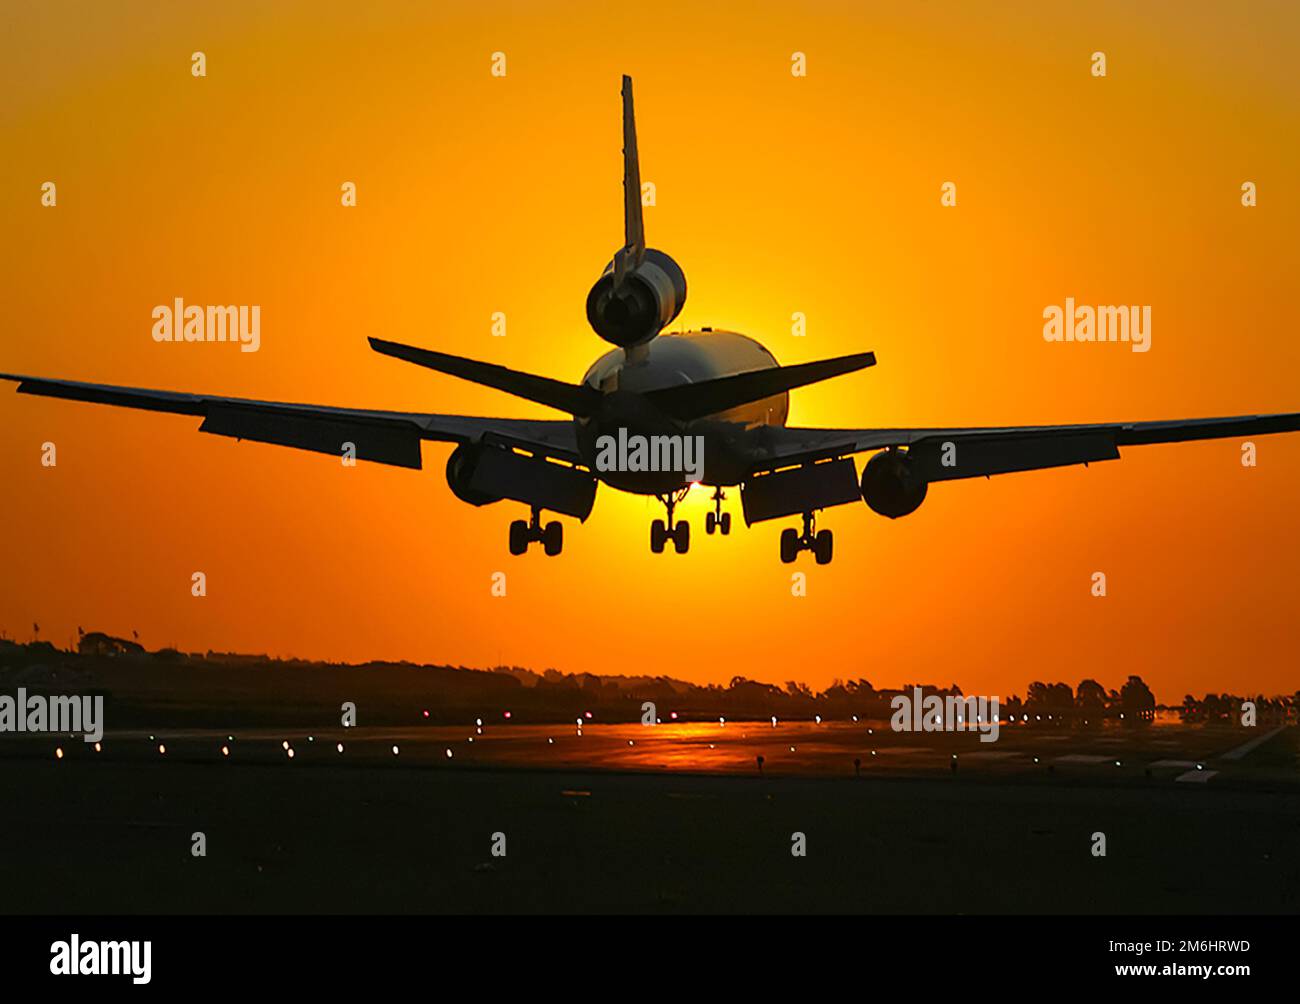 Takeoff of a passenger plane on the background of a sunset. Stock Photo